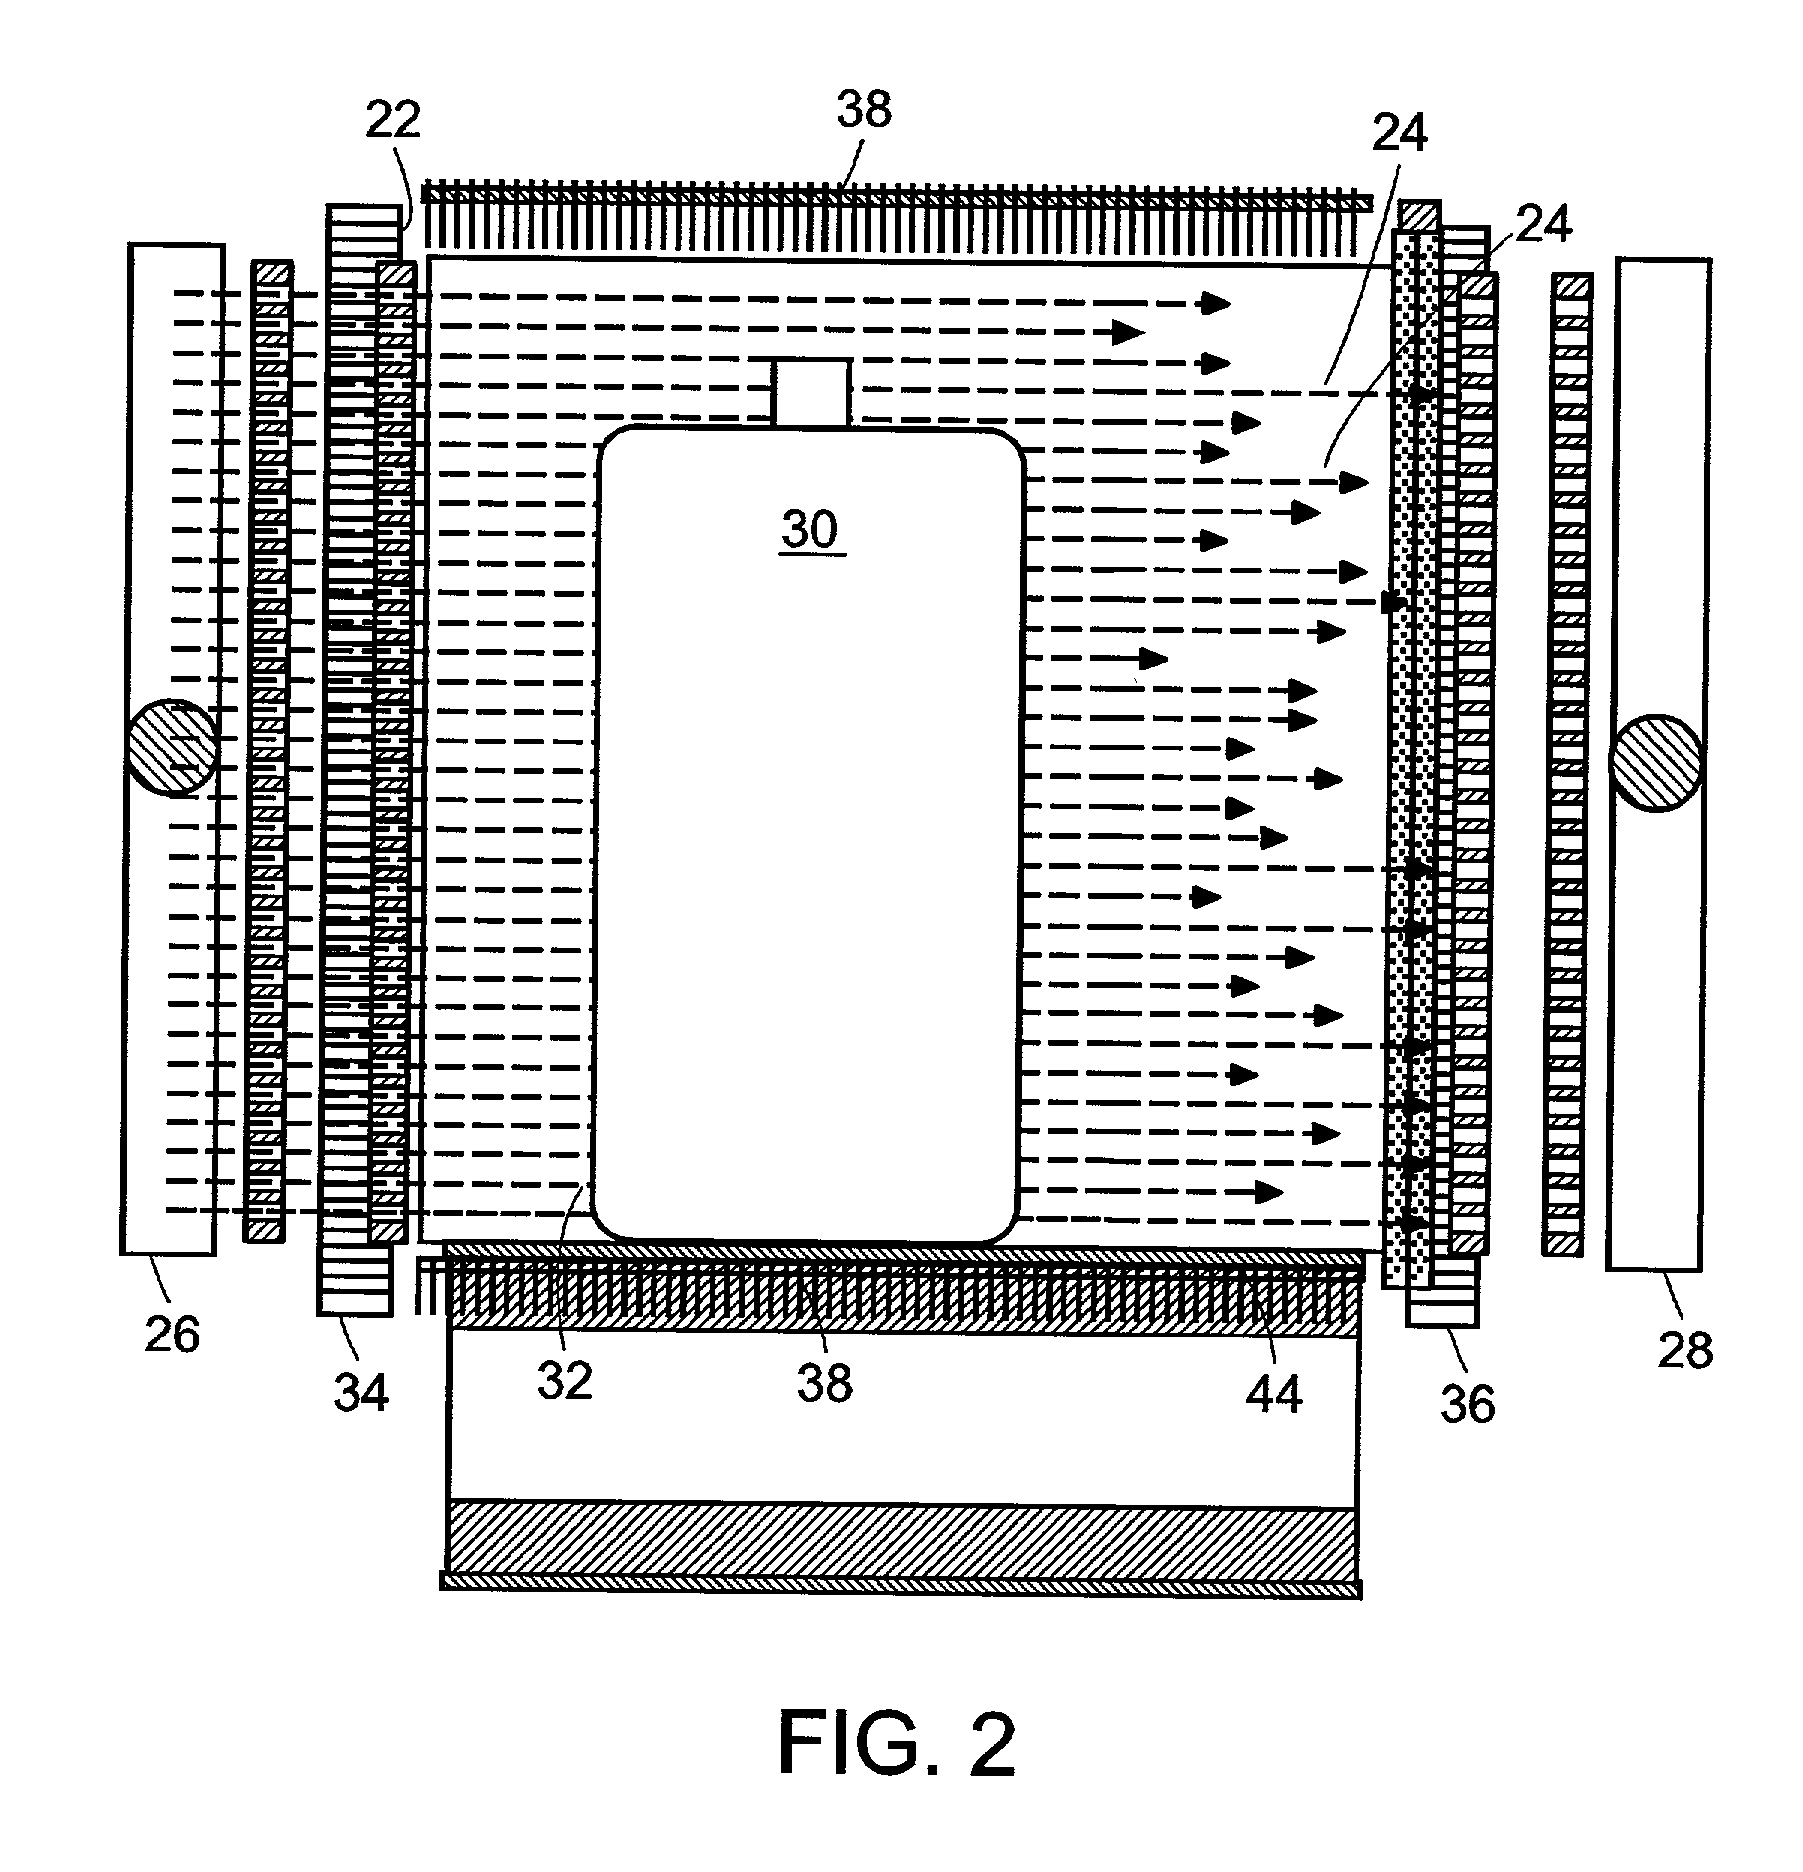 System for inspecting the contents of a container